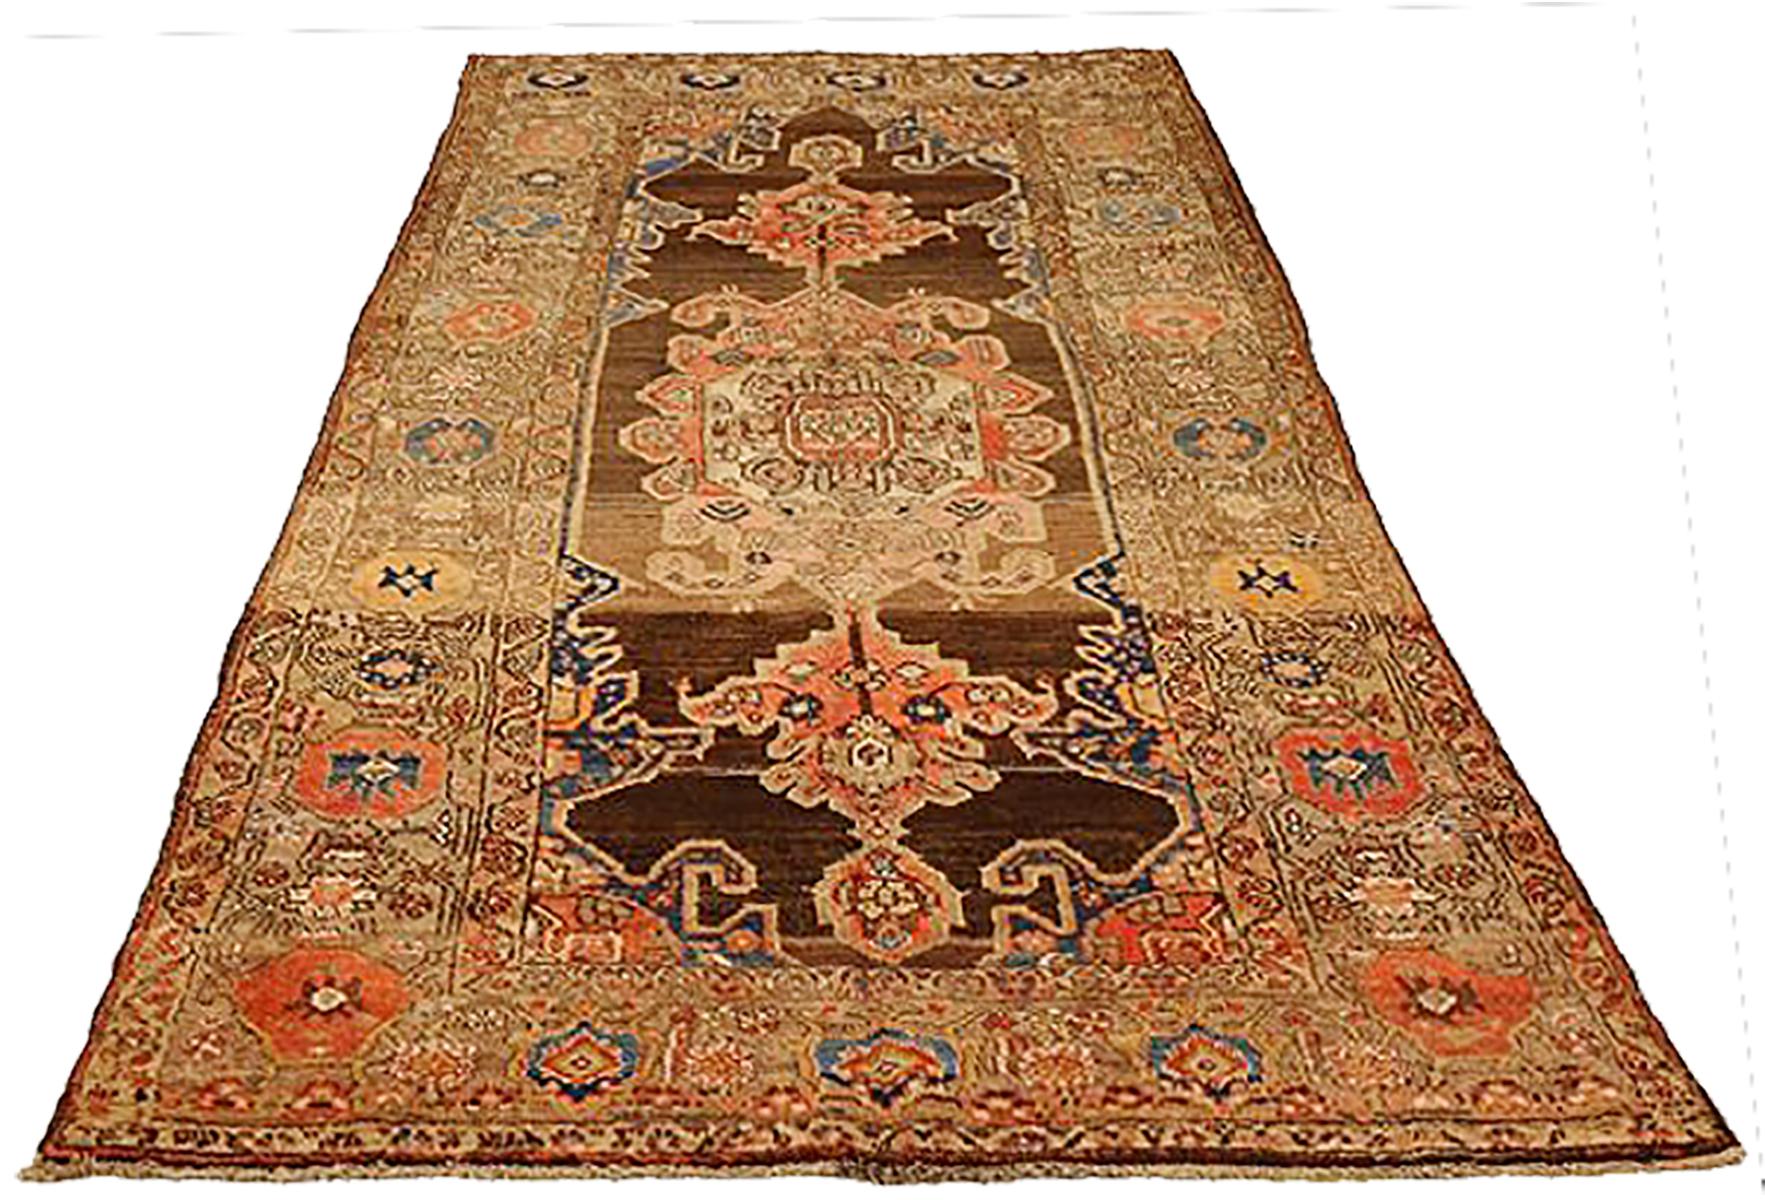 Antique Persian runner rug handwoven from the finest sheep’s wool and colored with all-natural vegetable dyes that are safe for humans and pets. It’s a traditional Malayer design featuring a mixed navy, brown and red combination of floral medallion